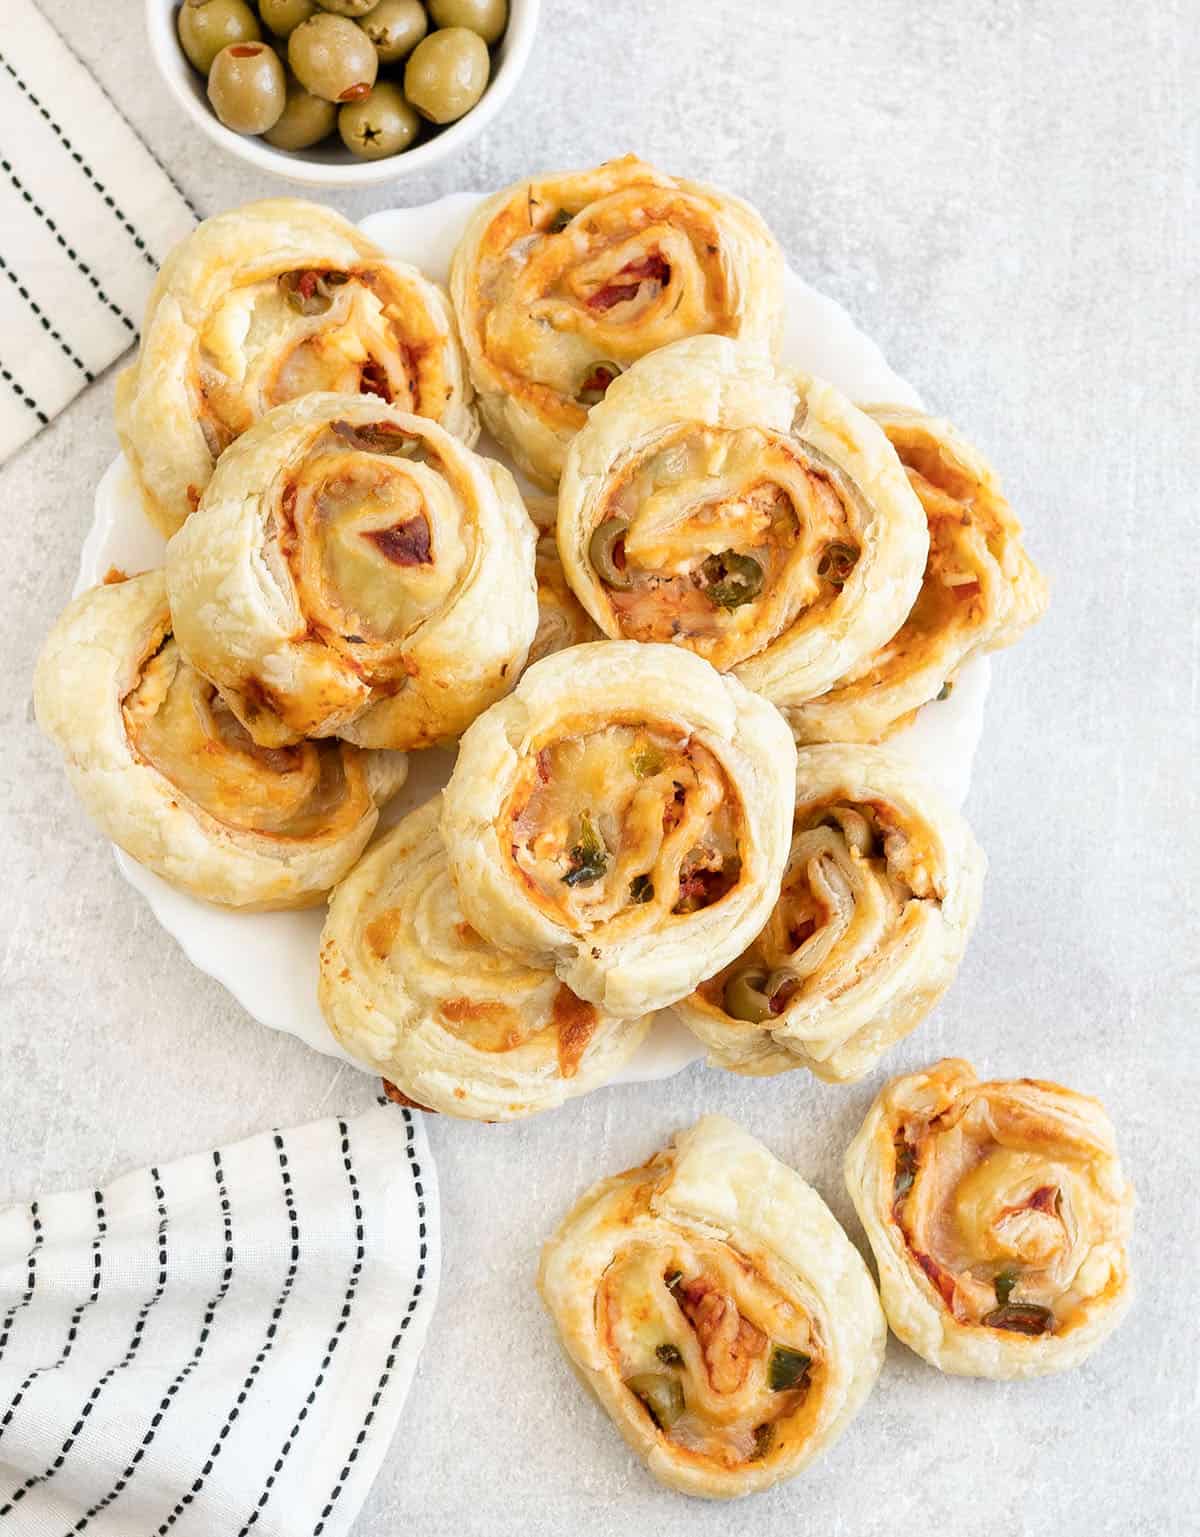 Puff pastry pizza rolls in a plate.